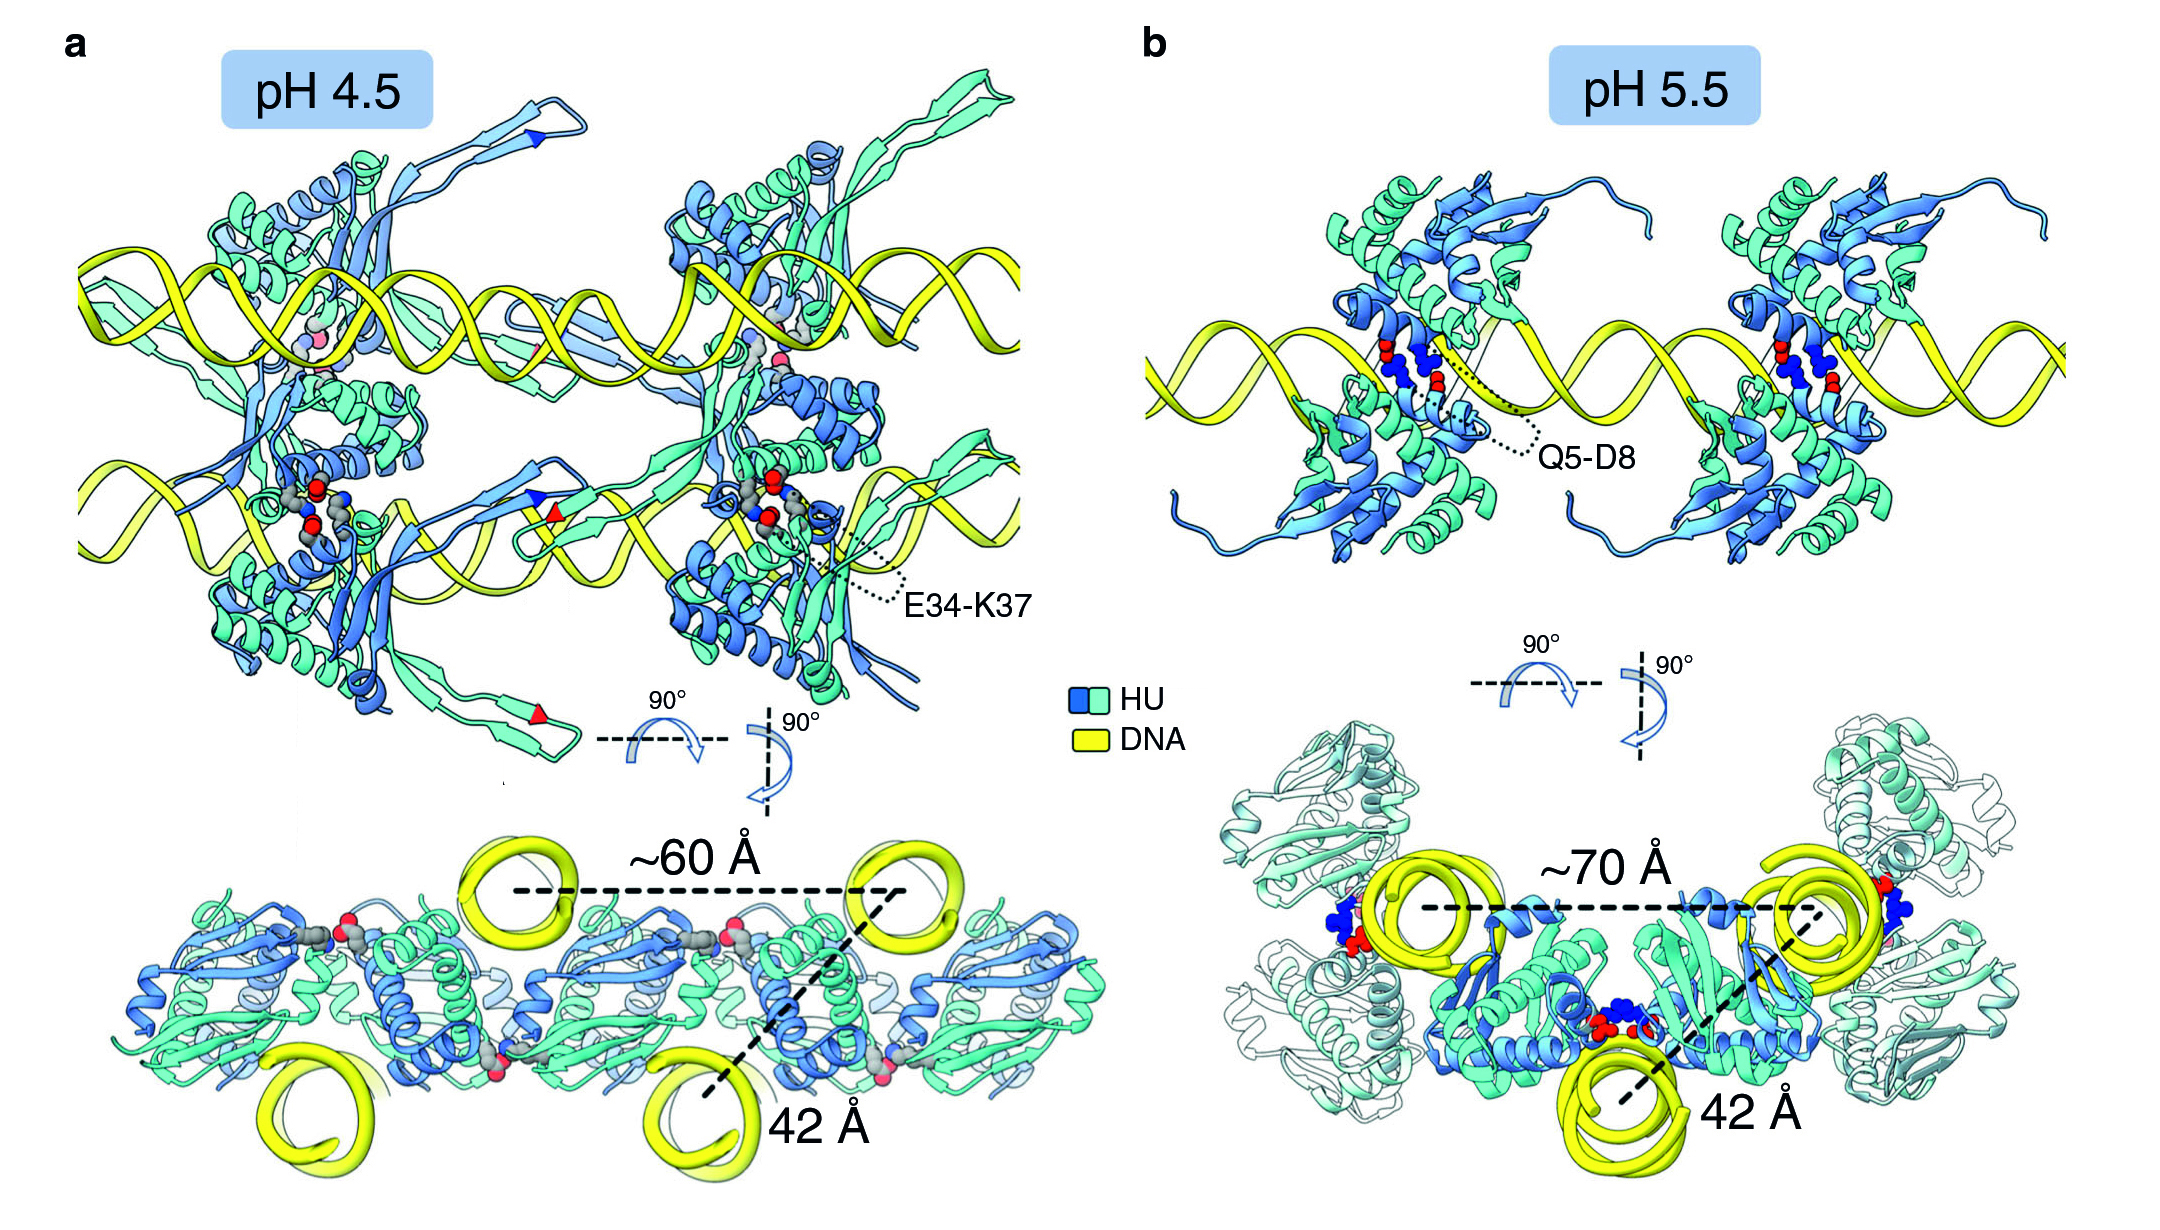 Orthogonal views of HU–DNA ribbon-diagram structures for pH 4.5 on left and pH 5.5 on right.